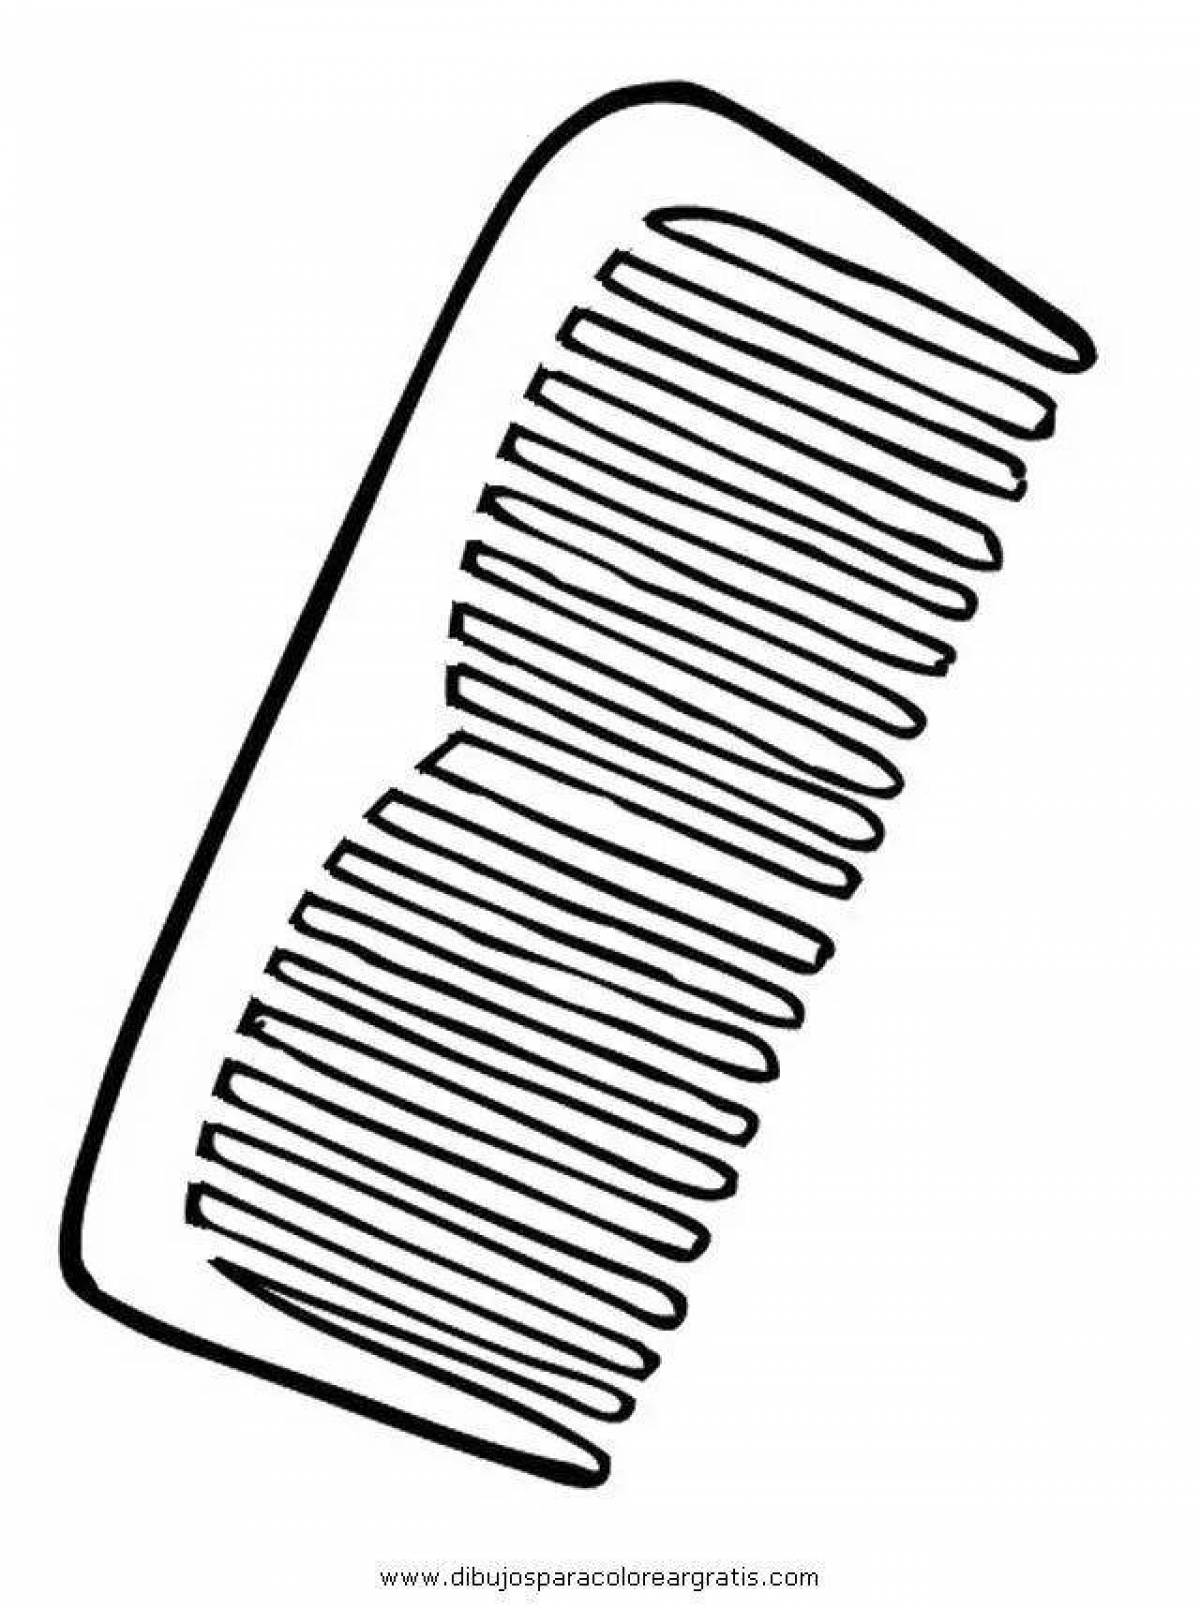 Animated comb coloring page for kids